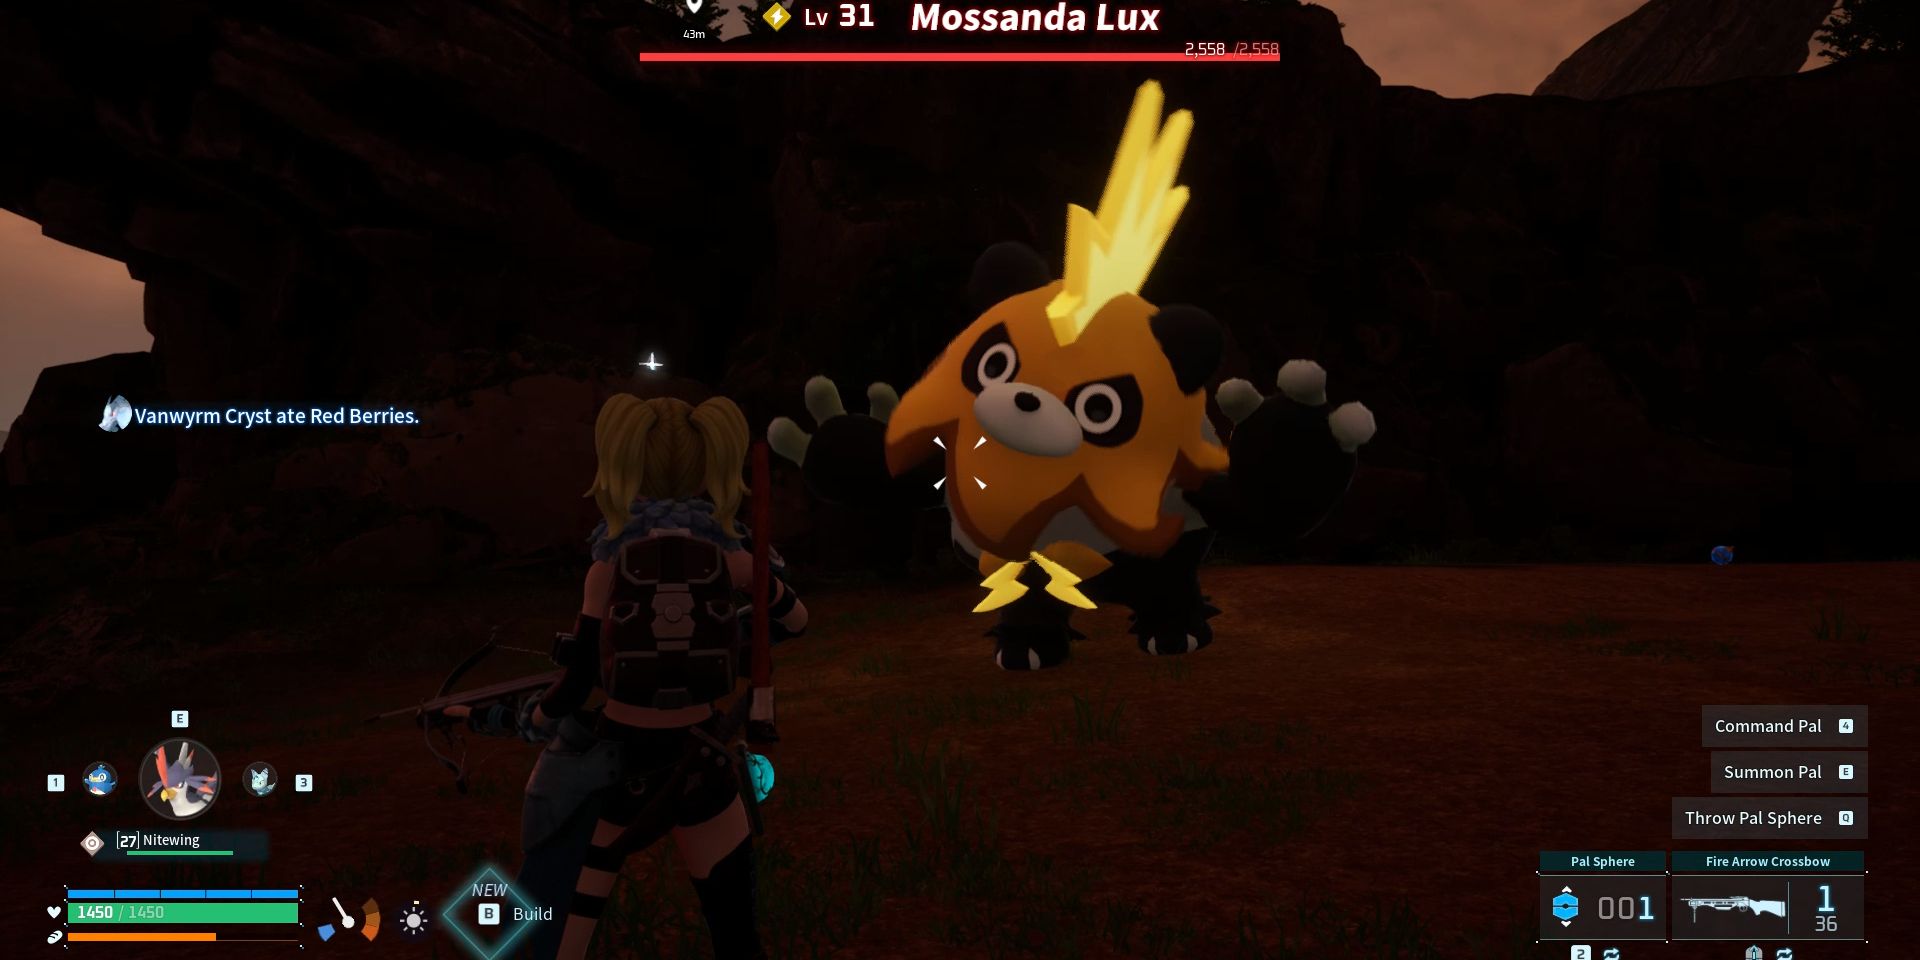 Image of a boss battle with Mossanda Lux in Palworld